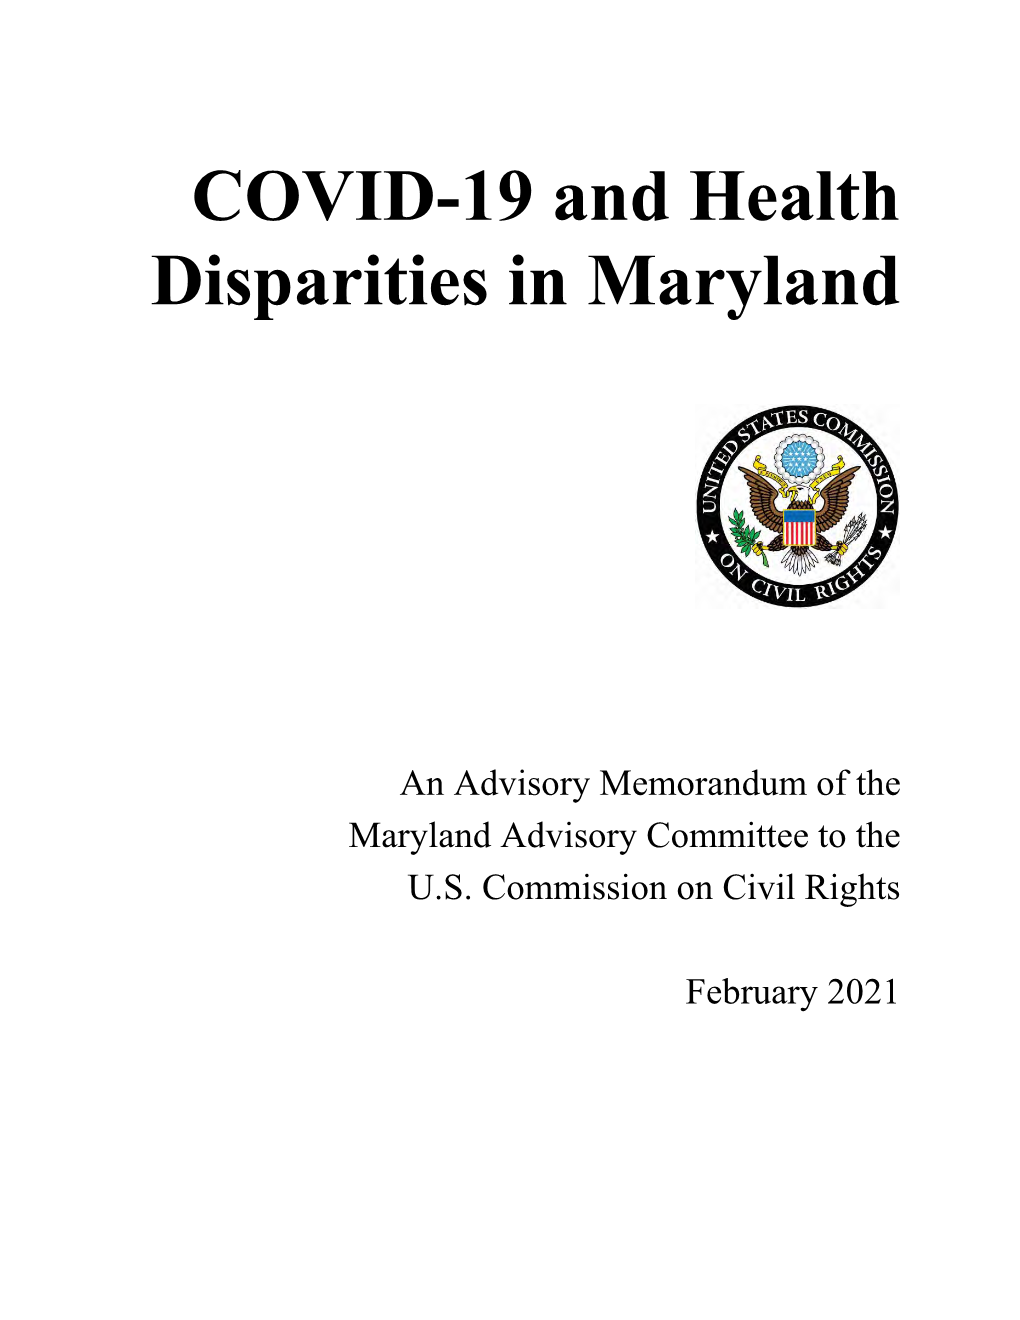 COVID-19 and Health Disparities in Maryland (2021)